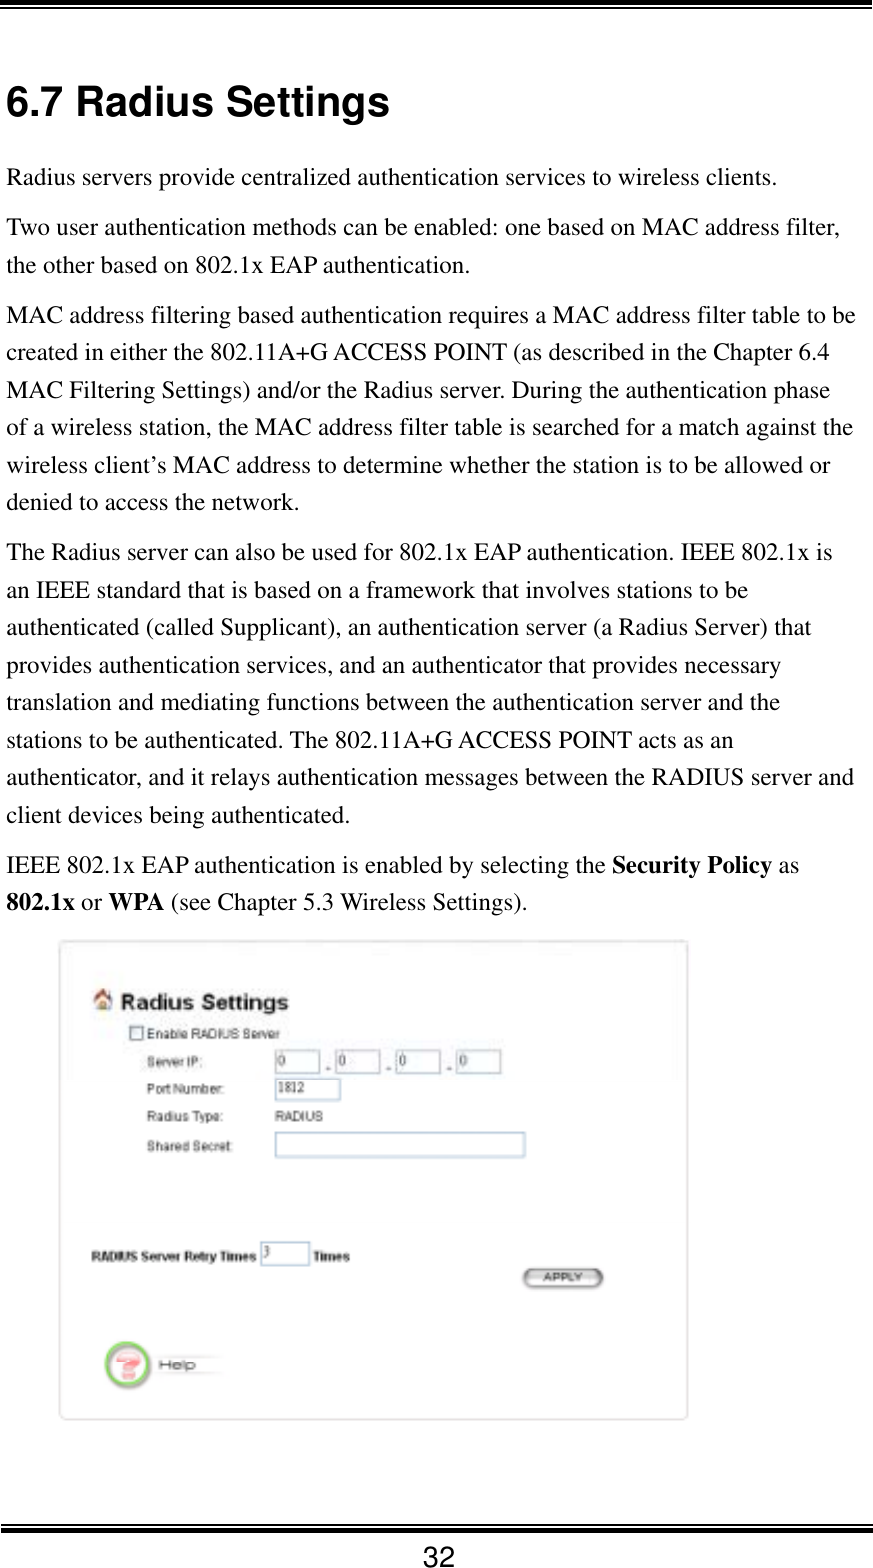  32 6.7 Radius Settings Radius servers provide centralized authentication services to wireless clients.   Two user authentication methods can be enabled: one based on MAC address filter, the other based on 802.1x EAP authentication. MAC address filtering based authentication requires a MAC address filter table to be created in either the 802.11A+G ACCESS POINT (as described in the Chapter 6.4 MAC Filtering Settings) and/or the Radius server. During the authentication phase of a wireless station, the MAC address filter table is searched for a match against the wireless client’s MAC address to determine whether the station is to be allowed or denied to access the network. The Radius server can also be used for 802.1x EAP authentication. IEEE 802.1x is an IEEE standard that is based on a framework that involves stations to be authenticated (called Supplicant), an authentication server (a Radius Server) that provides authentication services, and an authenticator that provides necessary translation and mediating functions between the authentication server and the stations to be authenticated. The 802.11A+G ACCESS POINT acts as an authenticator, and it relays authentication messages between the RADIUS server and client devices being authenticated. IEEE 802.1x EAP authentication is enabled by selecting the Security Policy as 802.1x or WPA (see Chapter 5.3 Wireless Settings).    